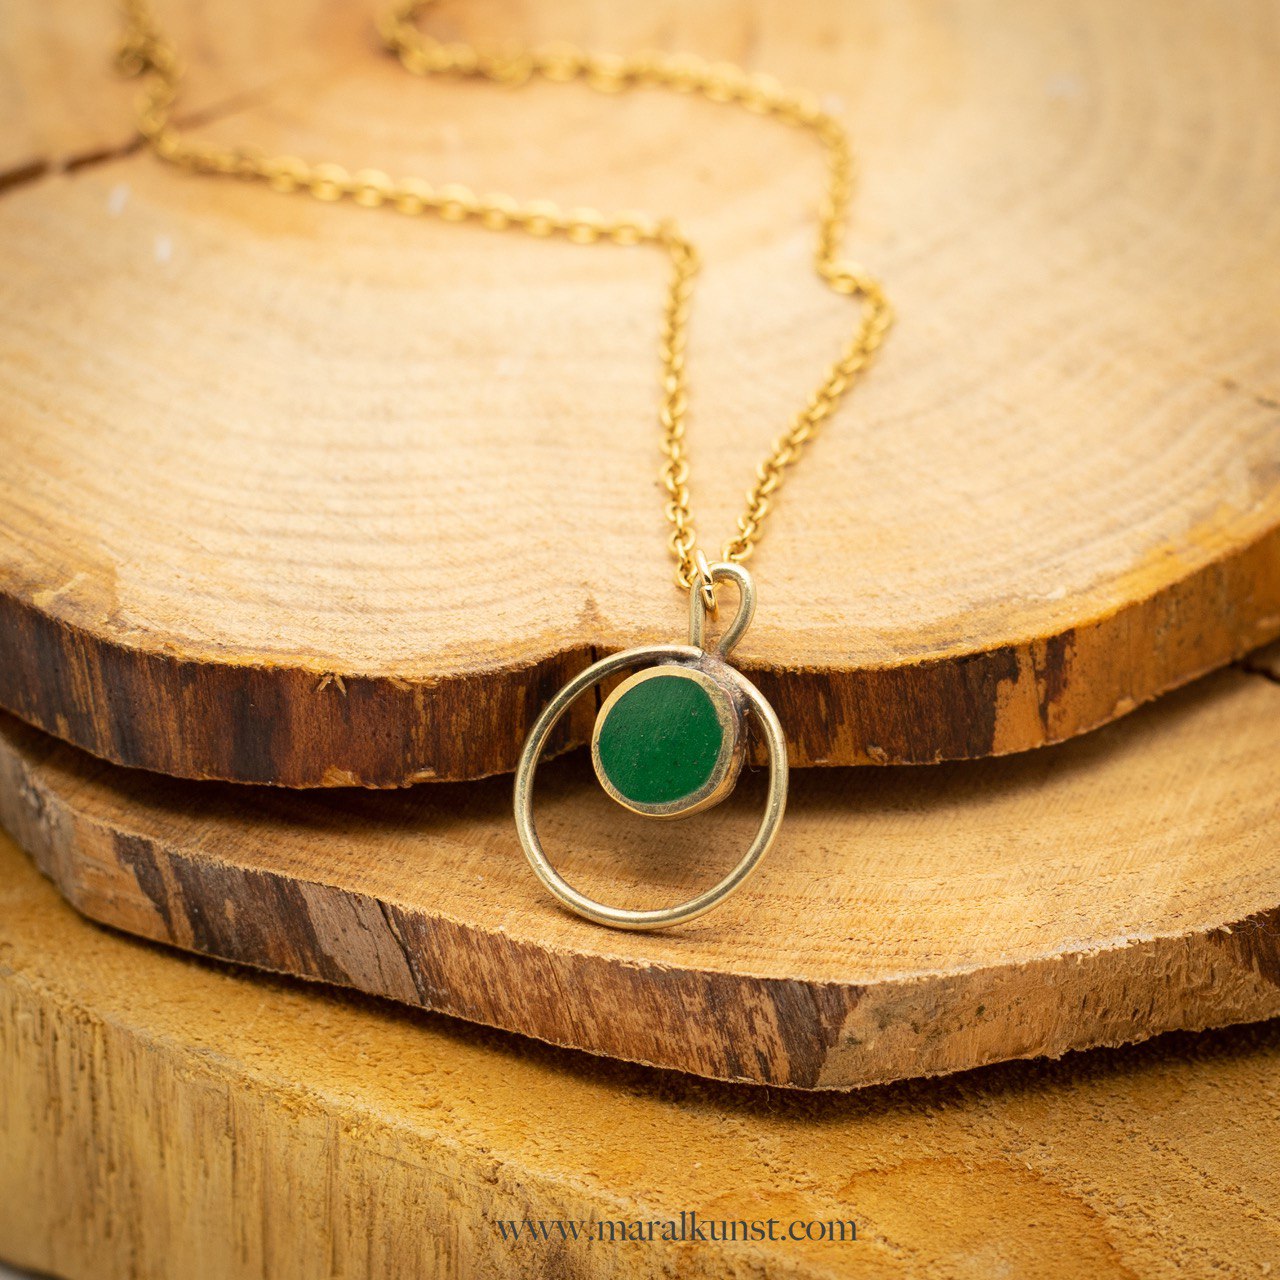 Vintage green charm necklace